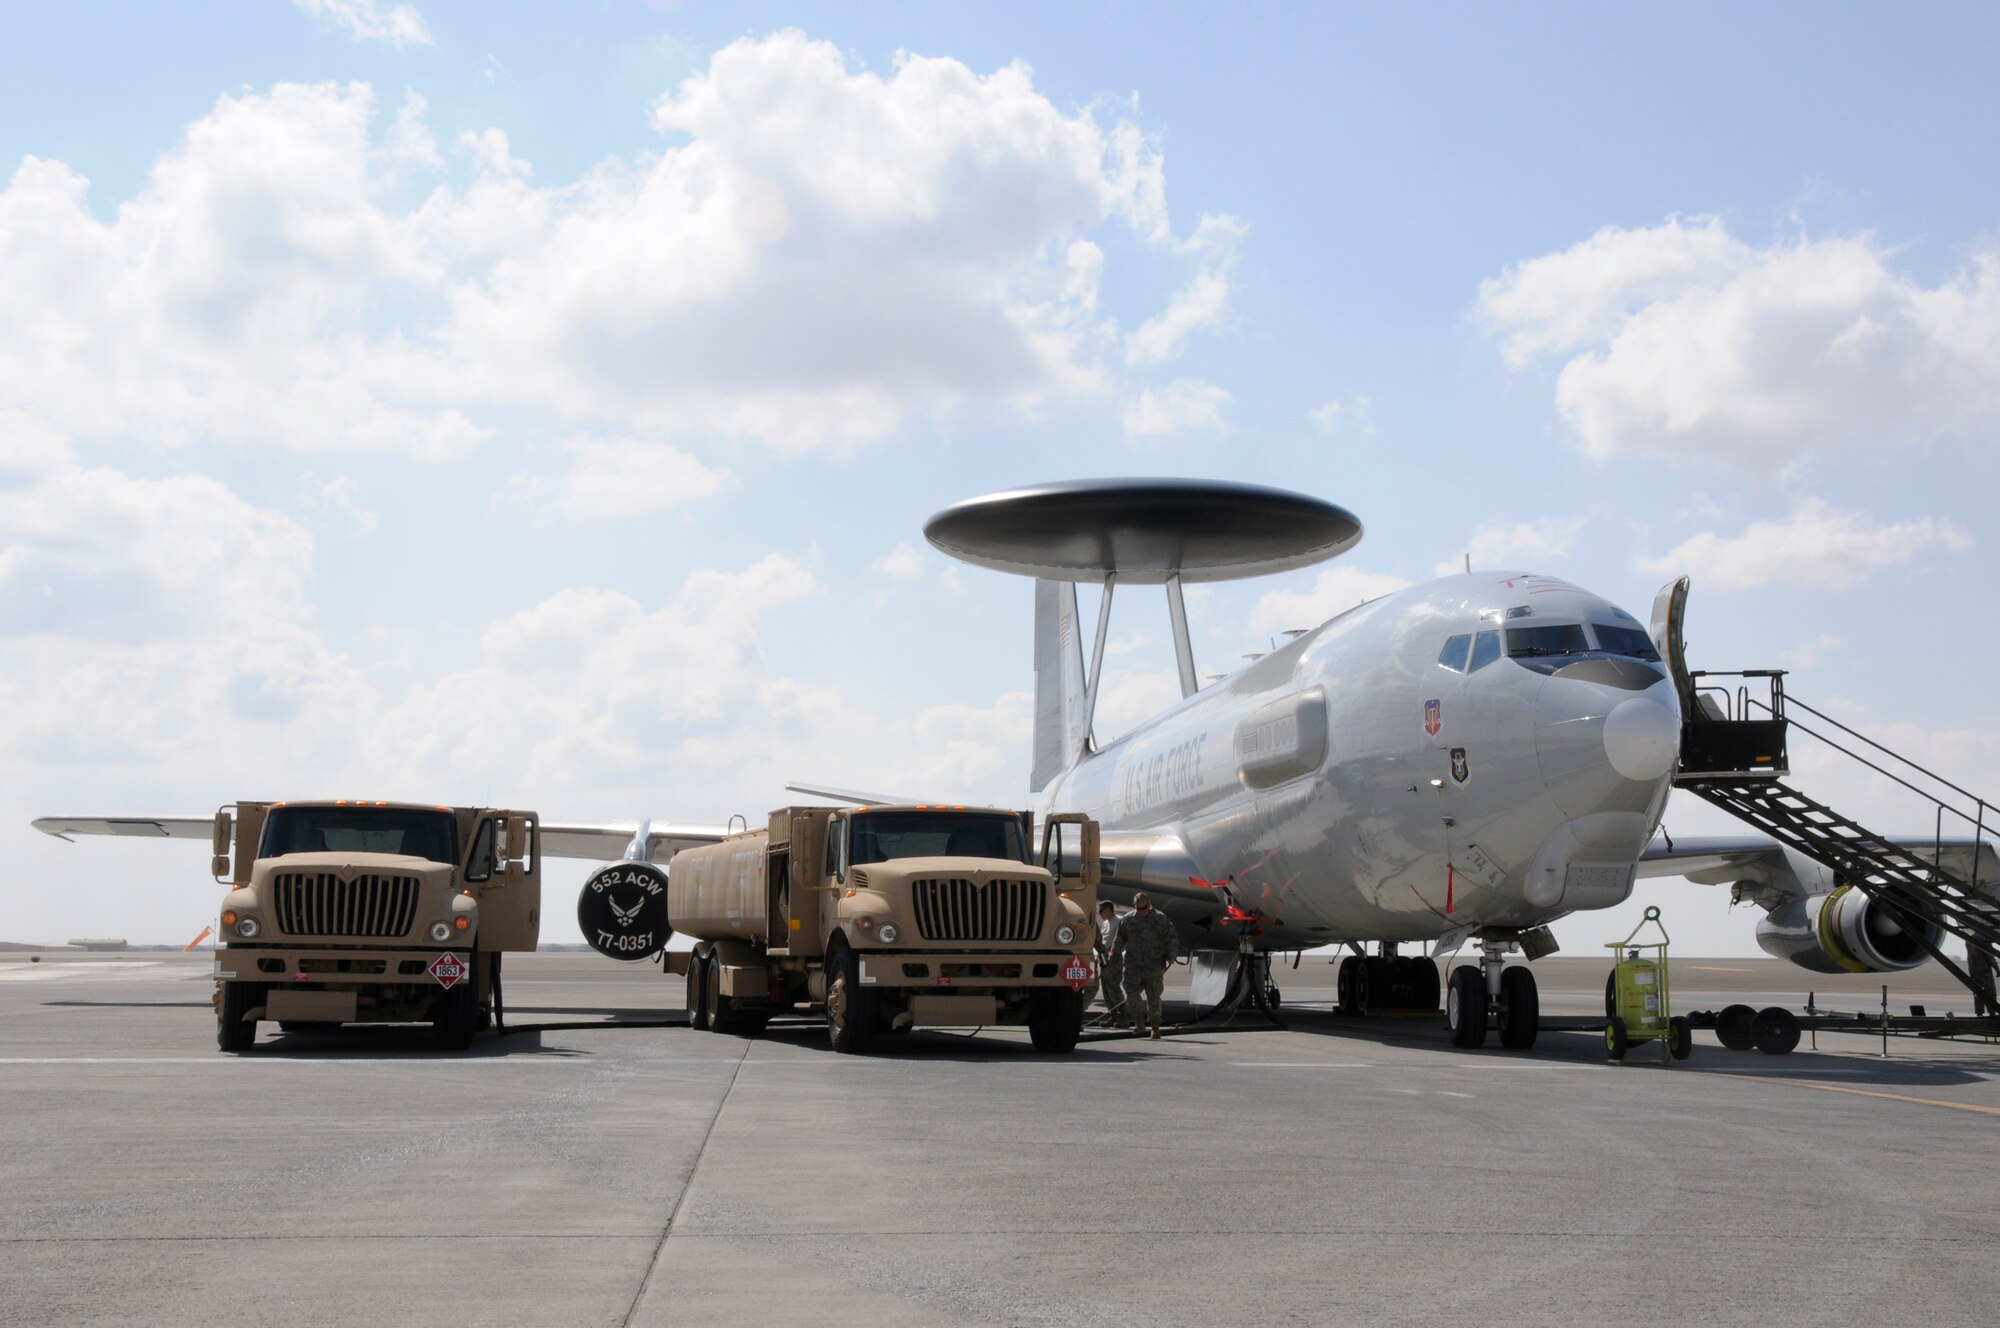 SOUTHWEST ASIA -- Two R-11 fuel trucks refuel an E-3 Sentry at the 380th Air Expeditionary Wing, Jan 21. The R-11 holds 6,000 gallons of fuel and is used to refuel the different aircraft at the 380th AEW. The E-3 Sentry takes 20,000 gallons to refuel when completely empty. The 380th is the second largest refueling wing in the Air Force distributing an average of 520,000 gallons a day to aircraft throughout southwest Asia. (U.S. Air Force photo by Senior Airman Brian J. Ellis) (Released)